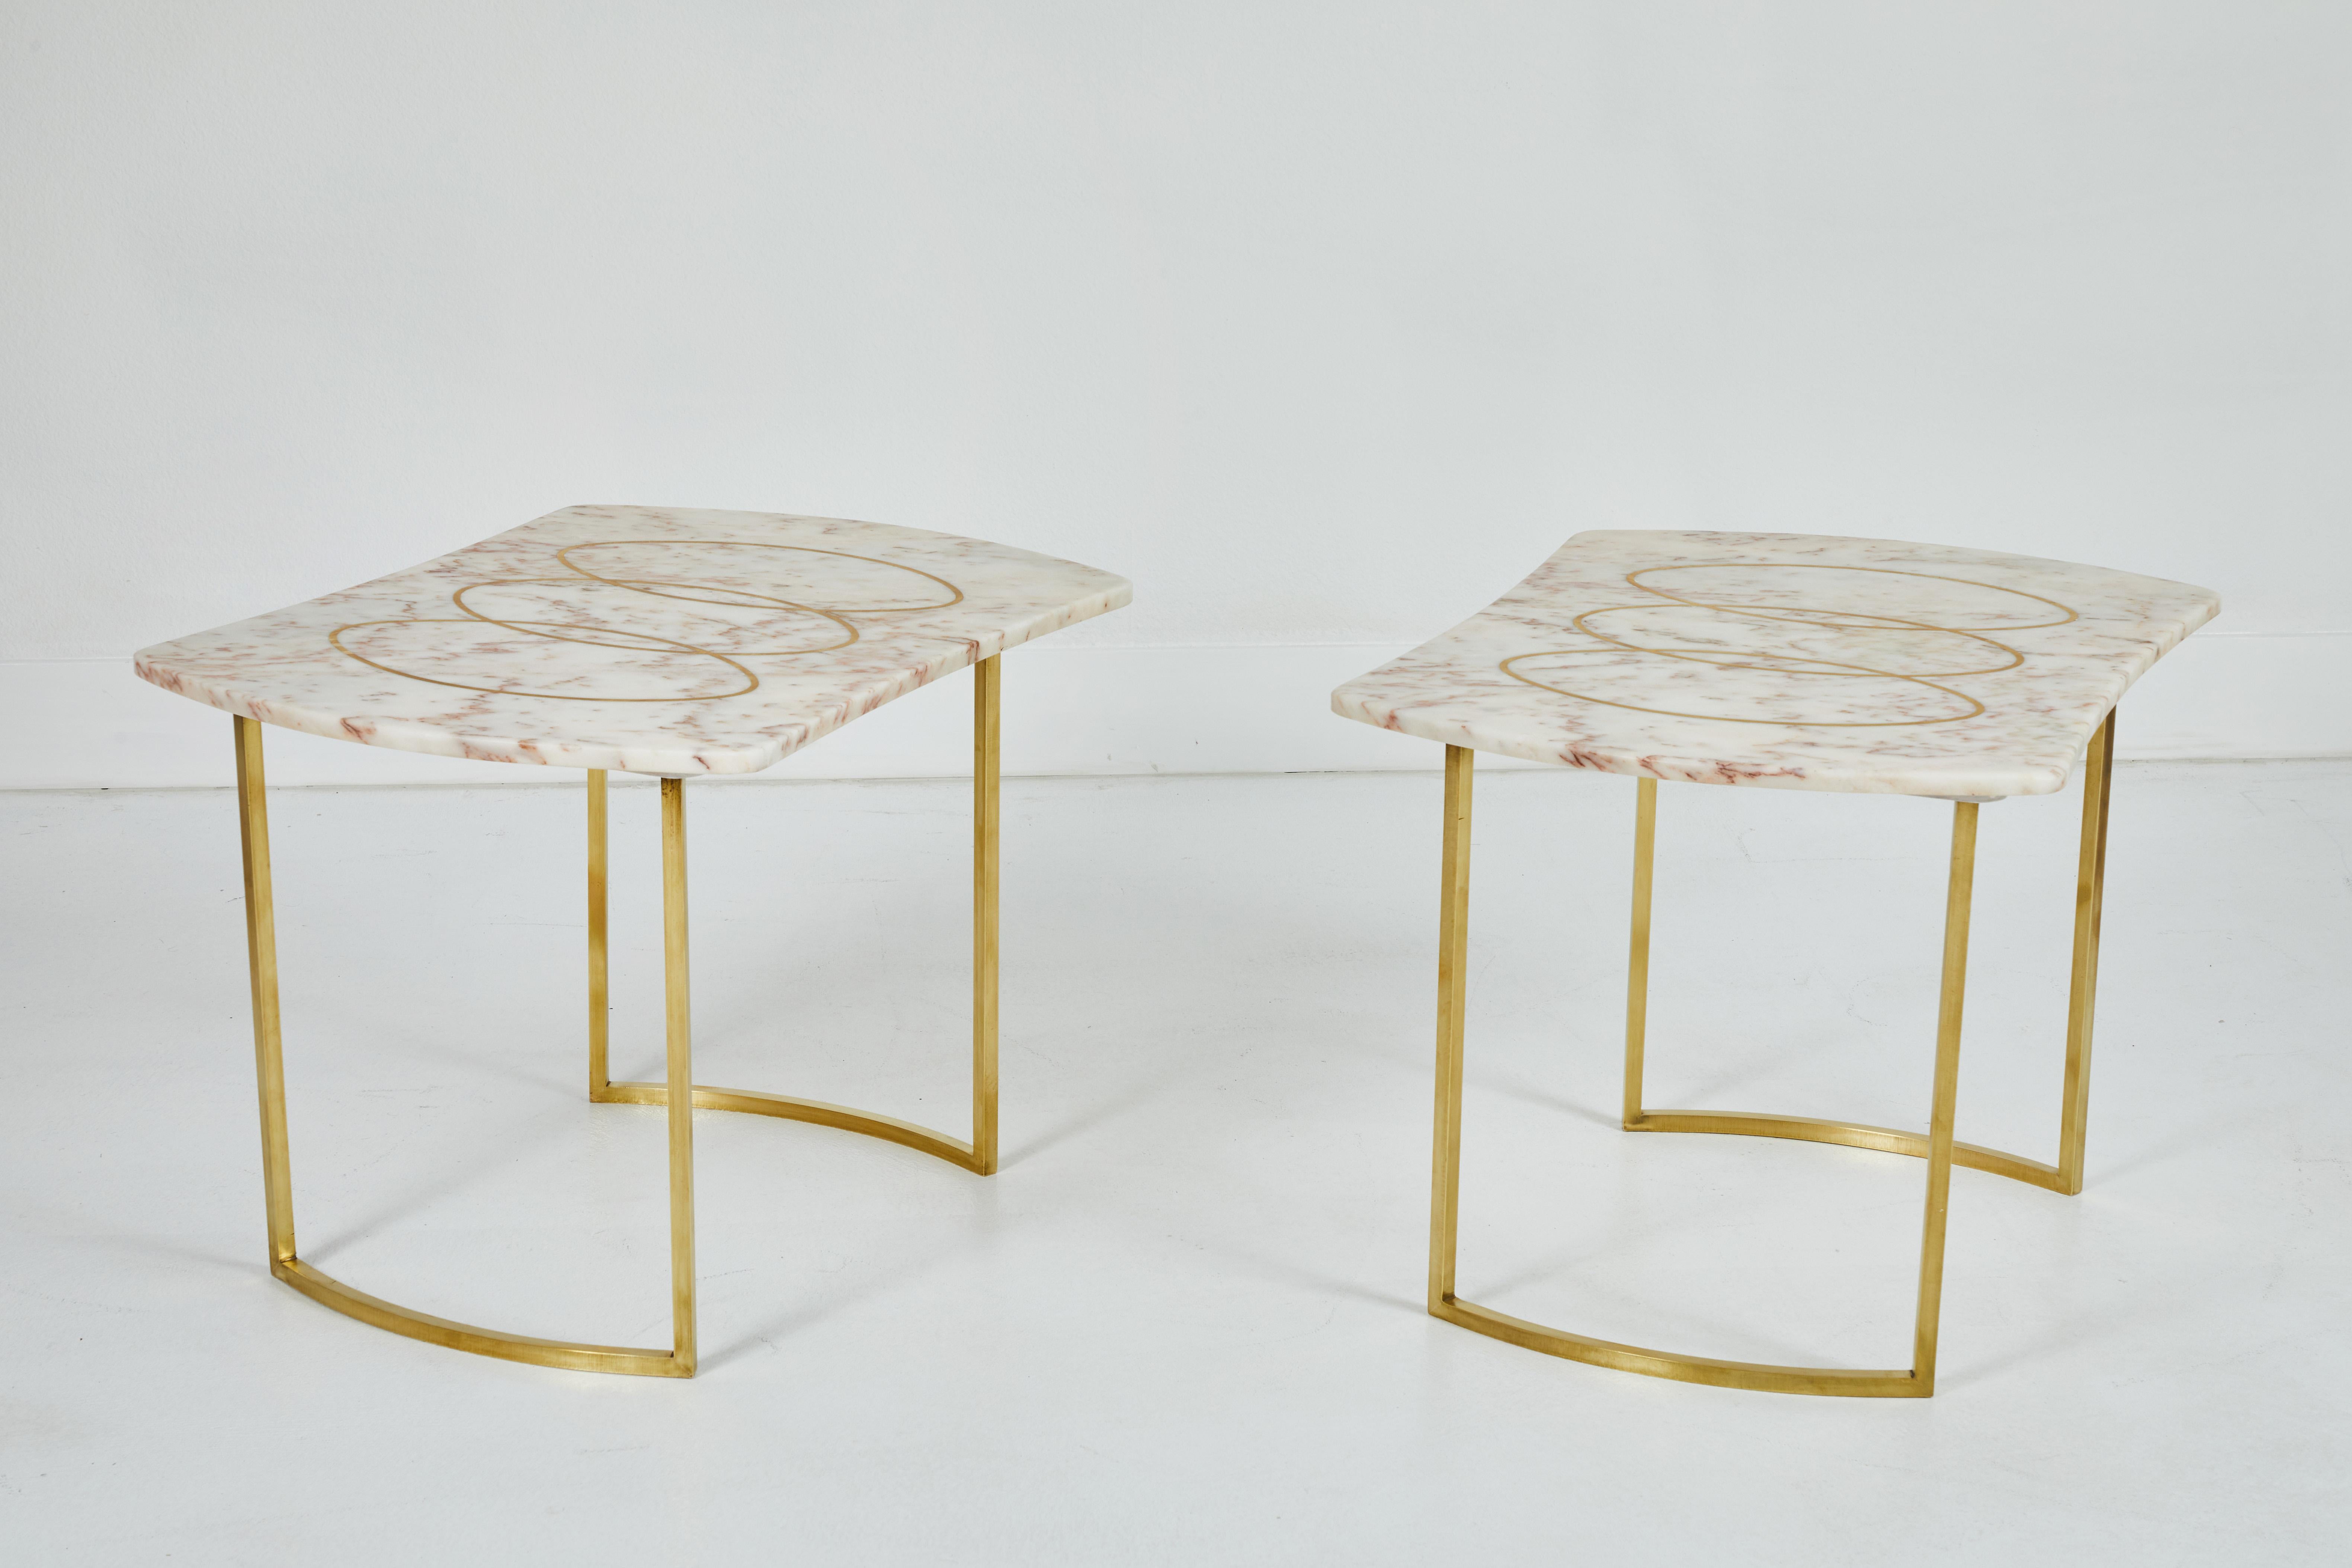 These are a pair of beautiful rose and cream colored marble top side tables. The tops are inlaid with 3 complimentary polished brass ovals overlapping each other. The bases are polished matching the inlay. These are perfect for beside a bed or as